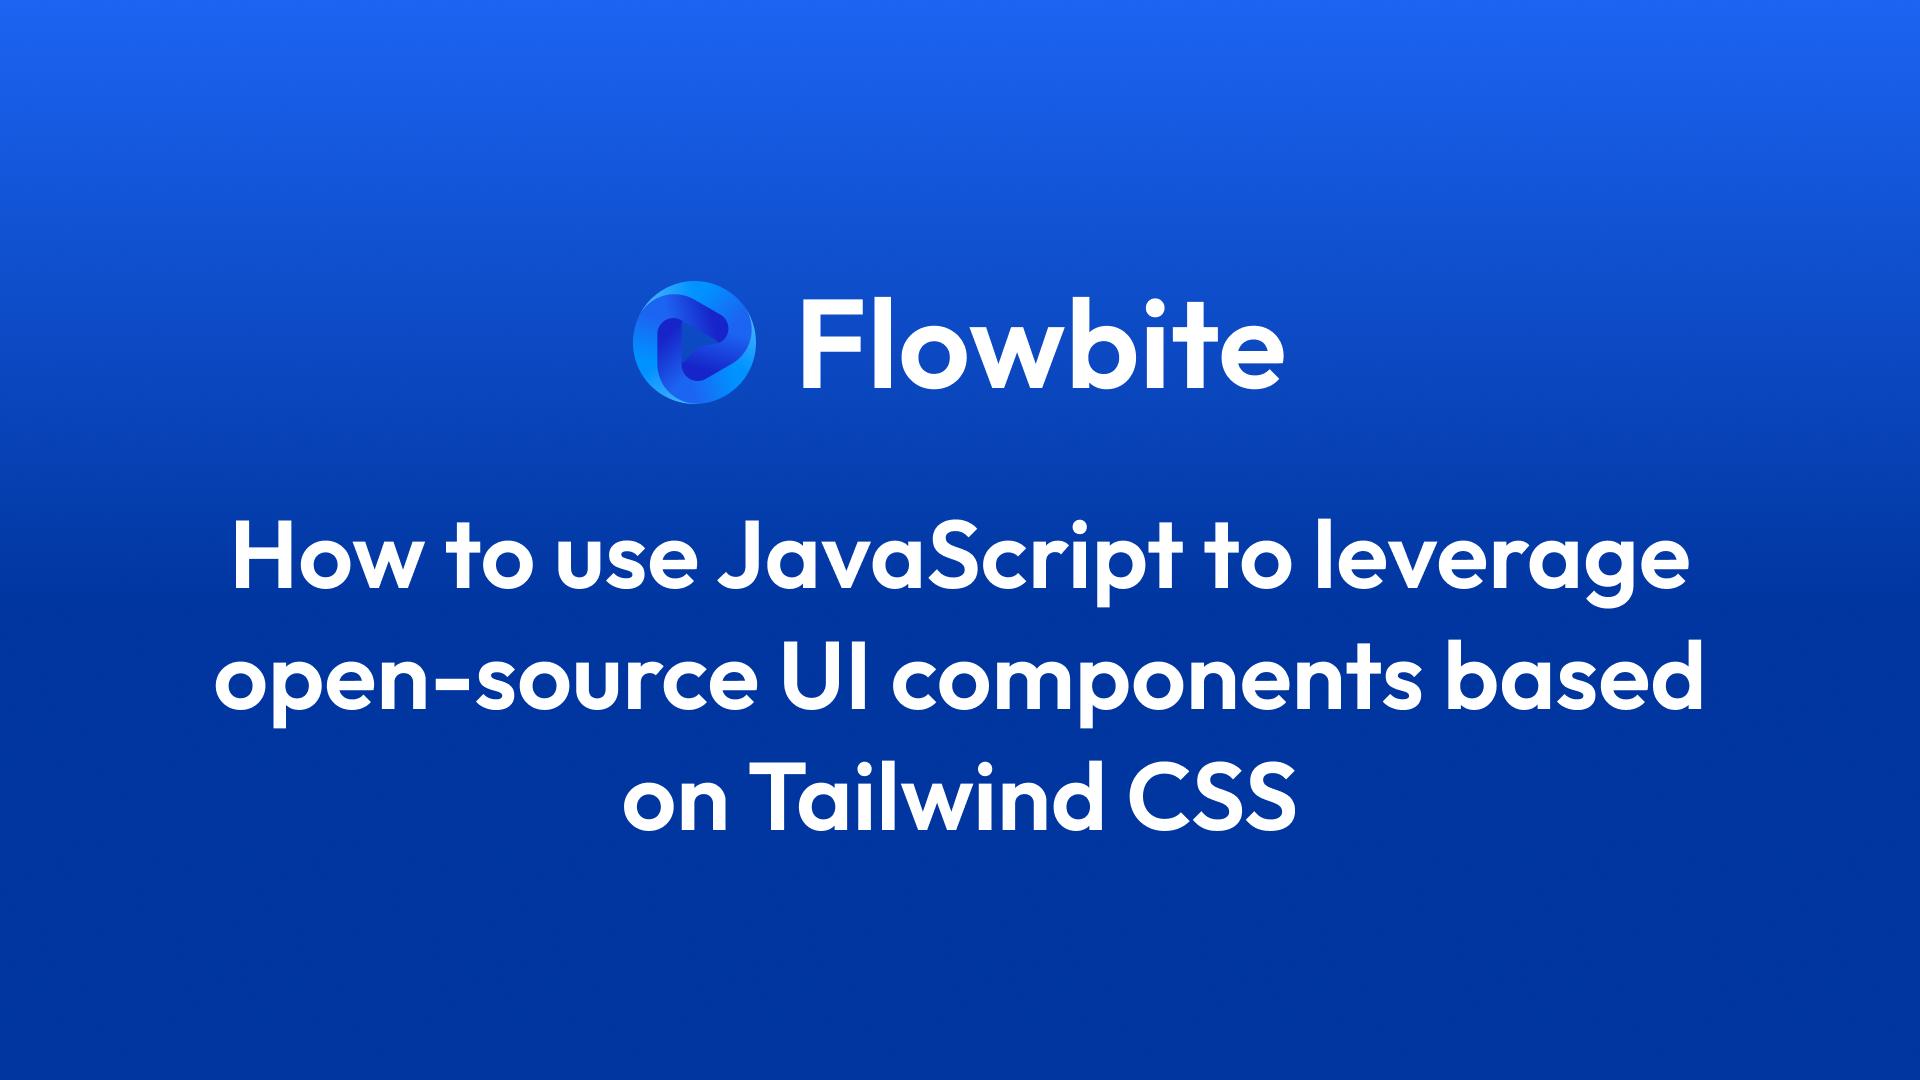 Learn how to use JavaScript to power UI components based on Tailwind CSS